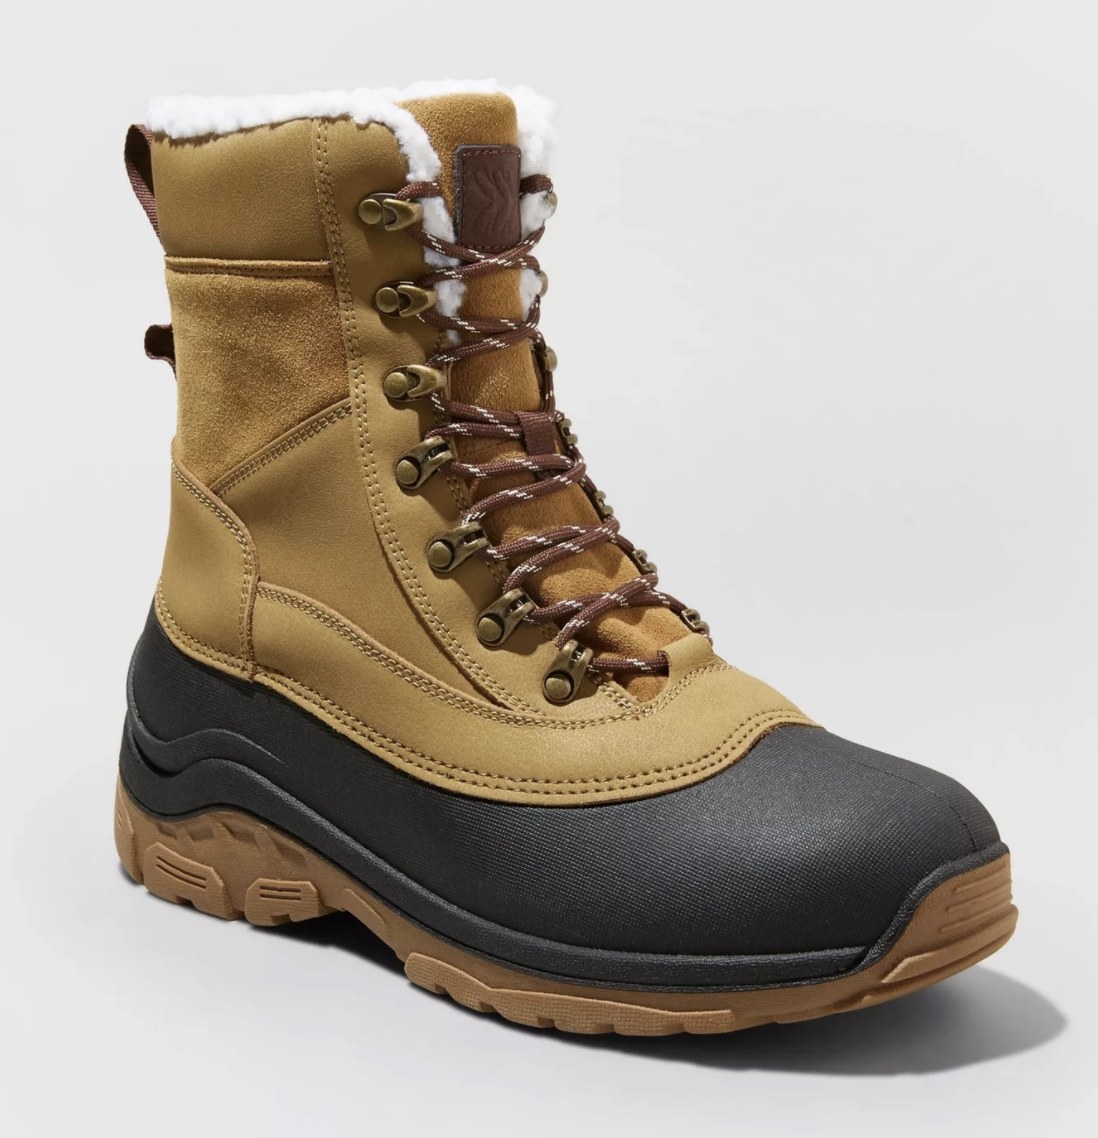 The tan and black hiking boots have a thick rubber black and tan sole